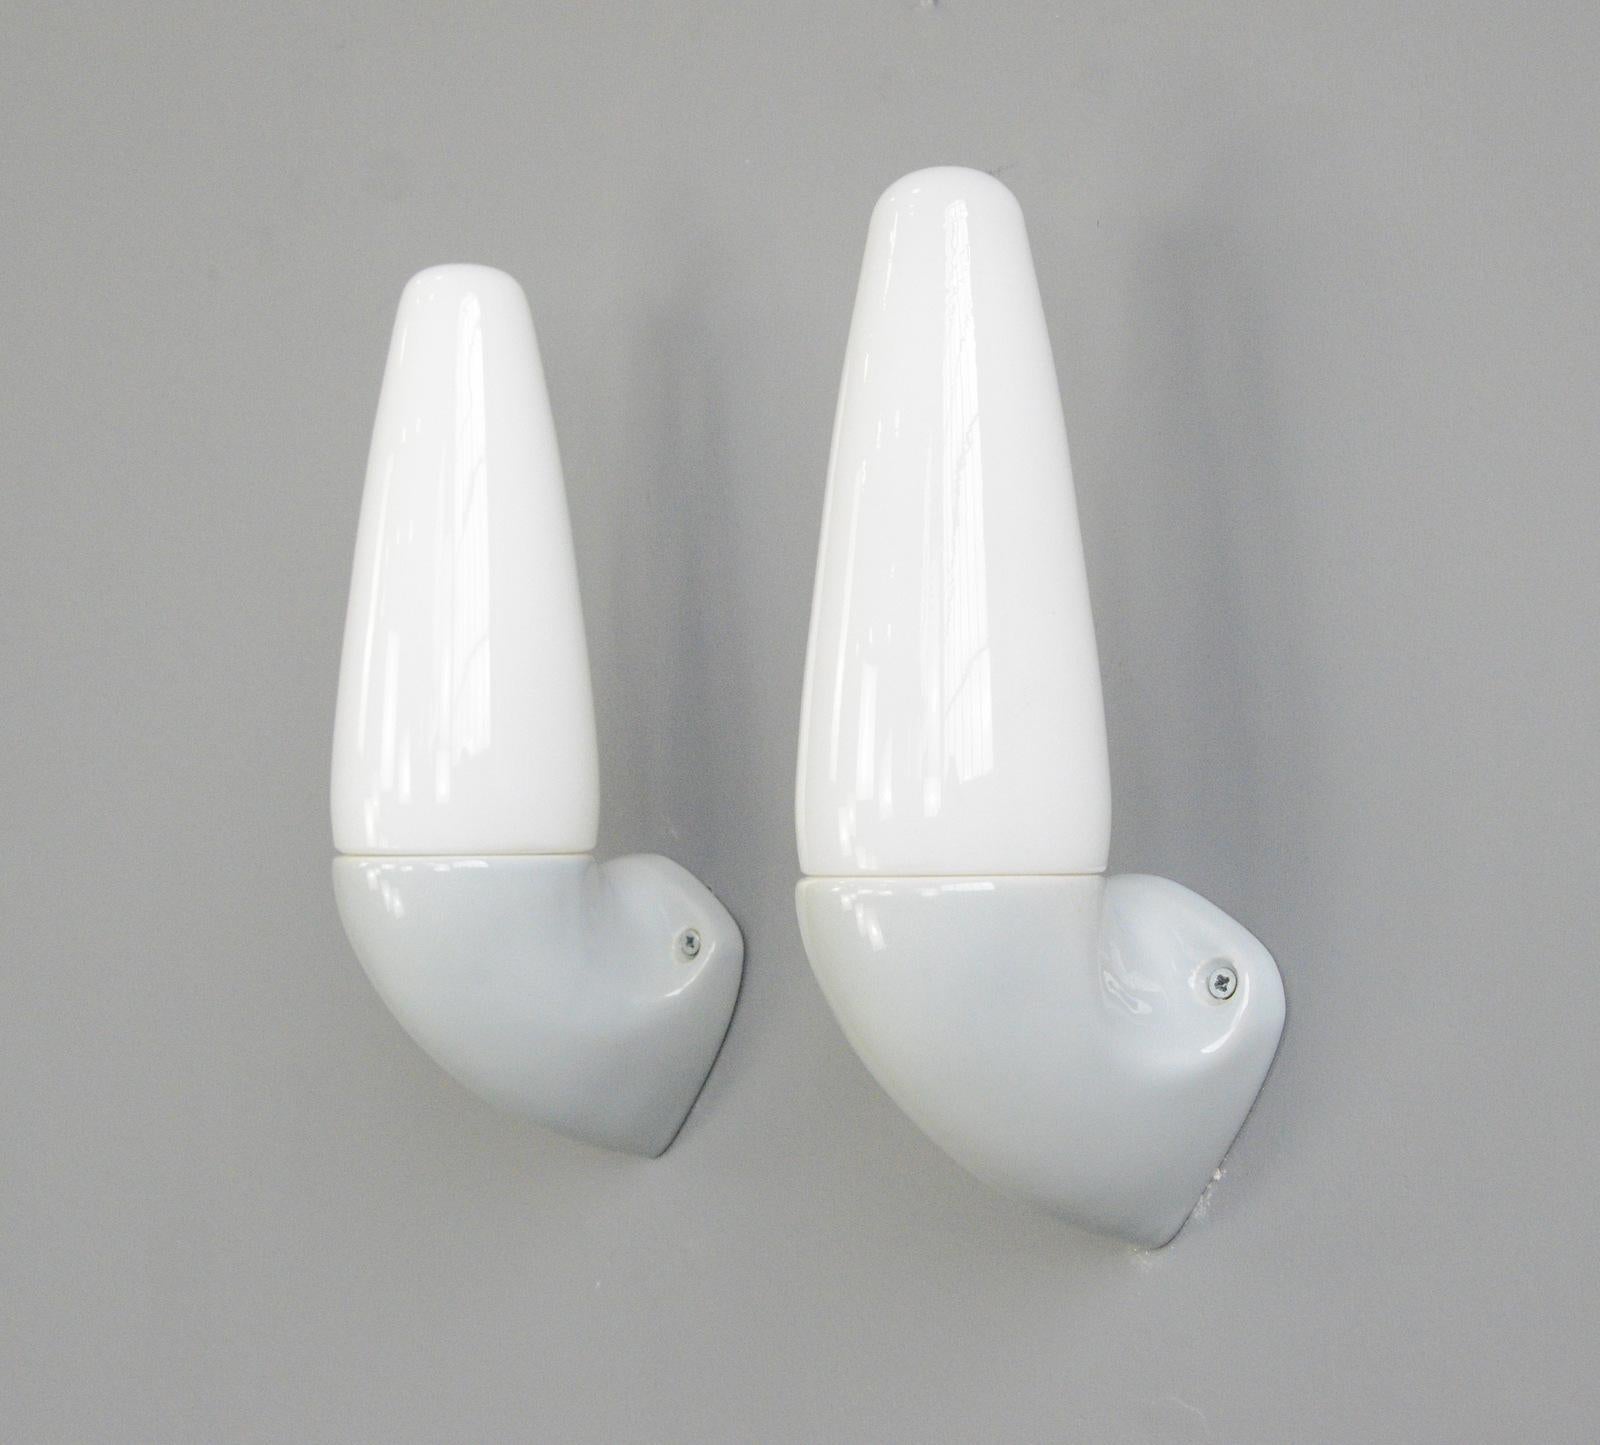 Mid-Century Modern Porcelain Bathroom Lights by Sigvard Bernadotte for Ifo circa 1950s For Sale